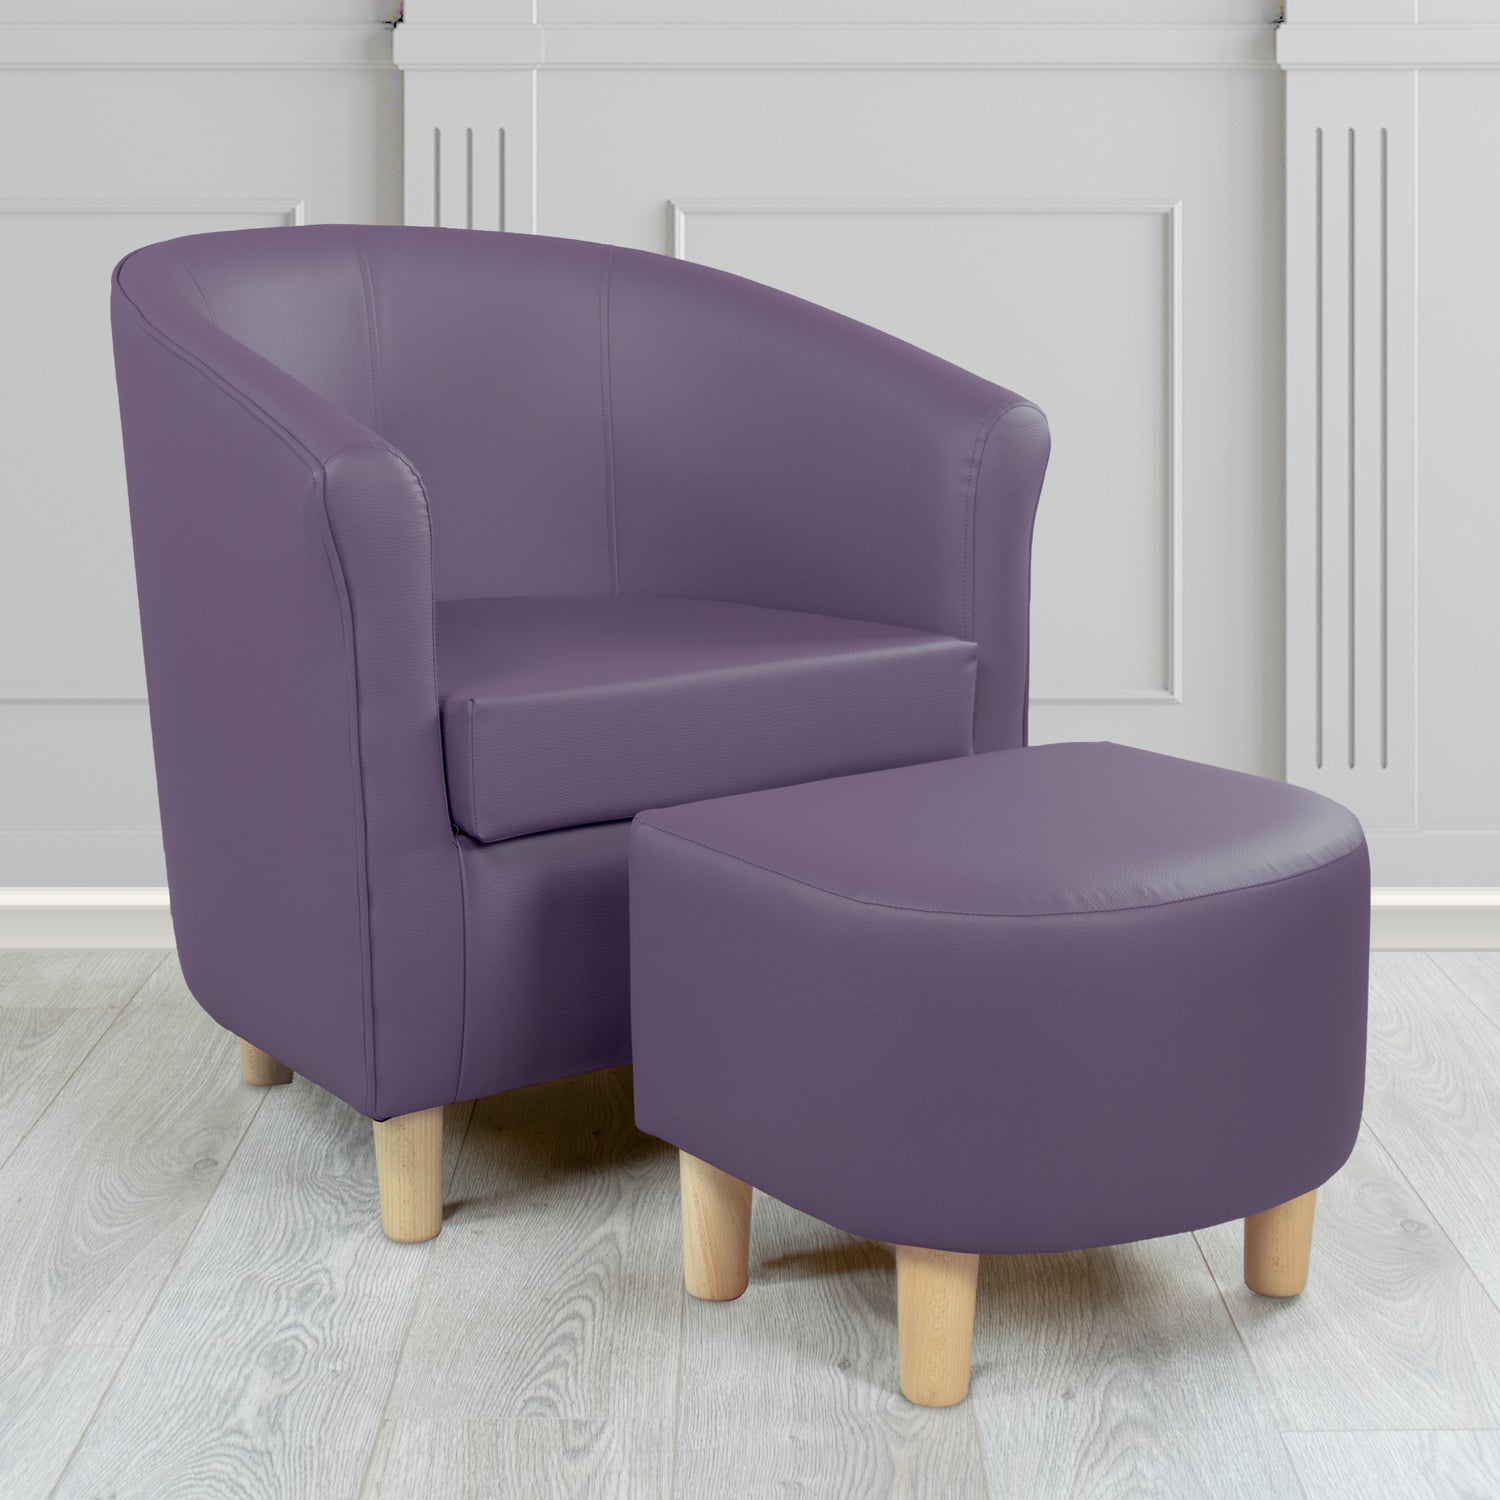 Tuscany Just Colour Professor Plum Faux Leather Tub Chair with Footstool Set - The Tub Chair Shop